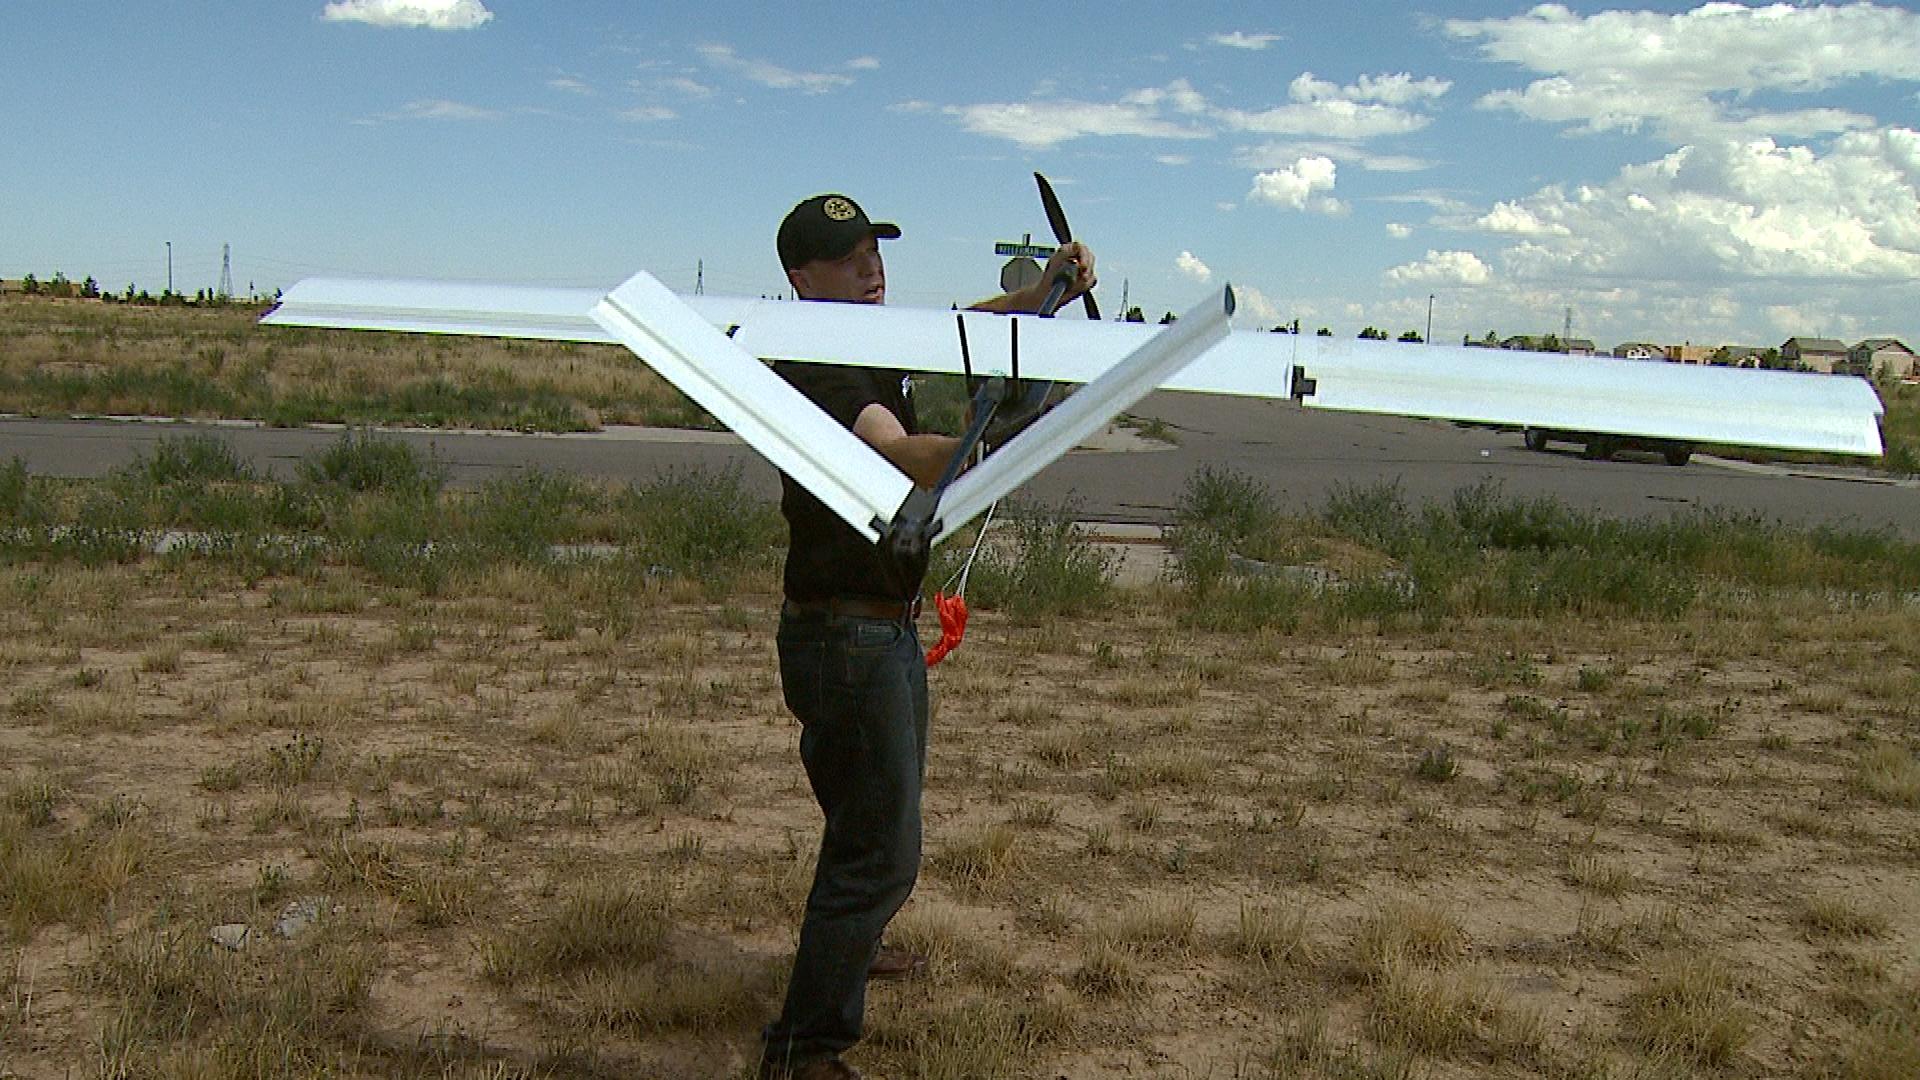 https://denver.cbslocal.com/2013/08/05/ordinance-would-allow-for-drone-hunting-in-deer-trail/